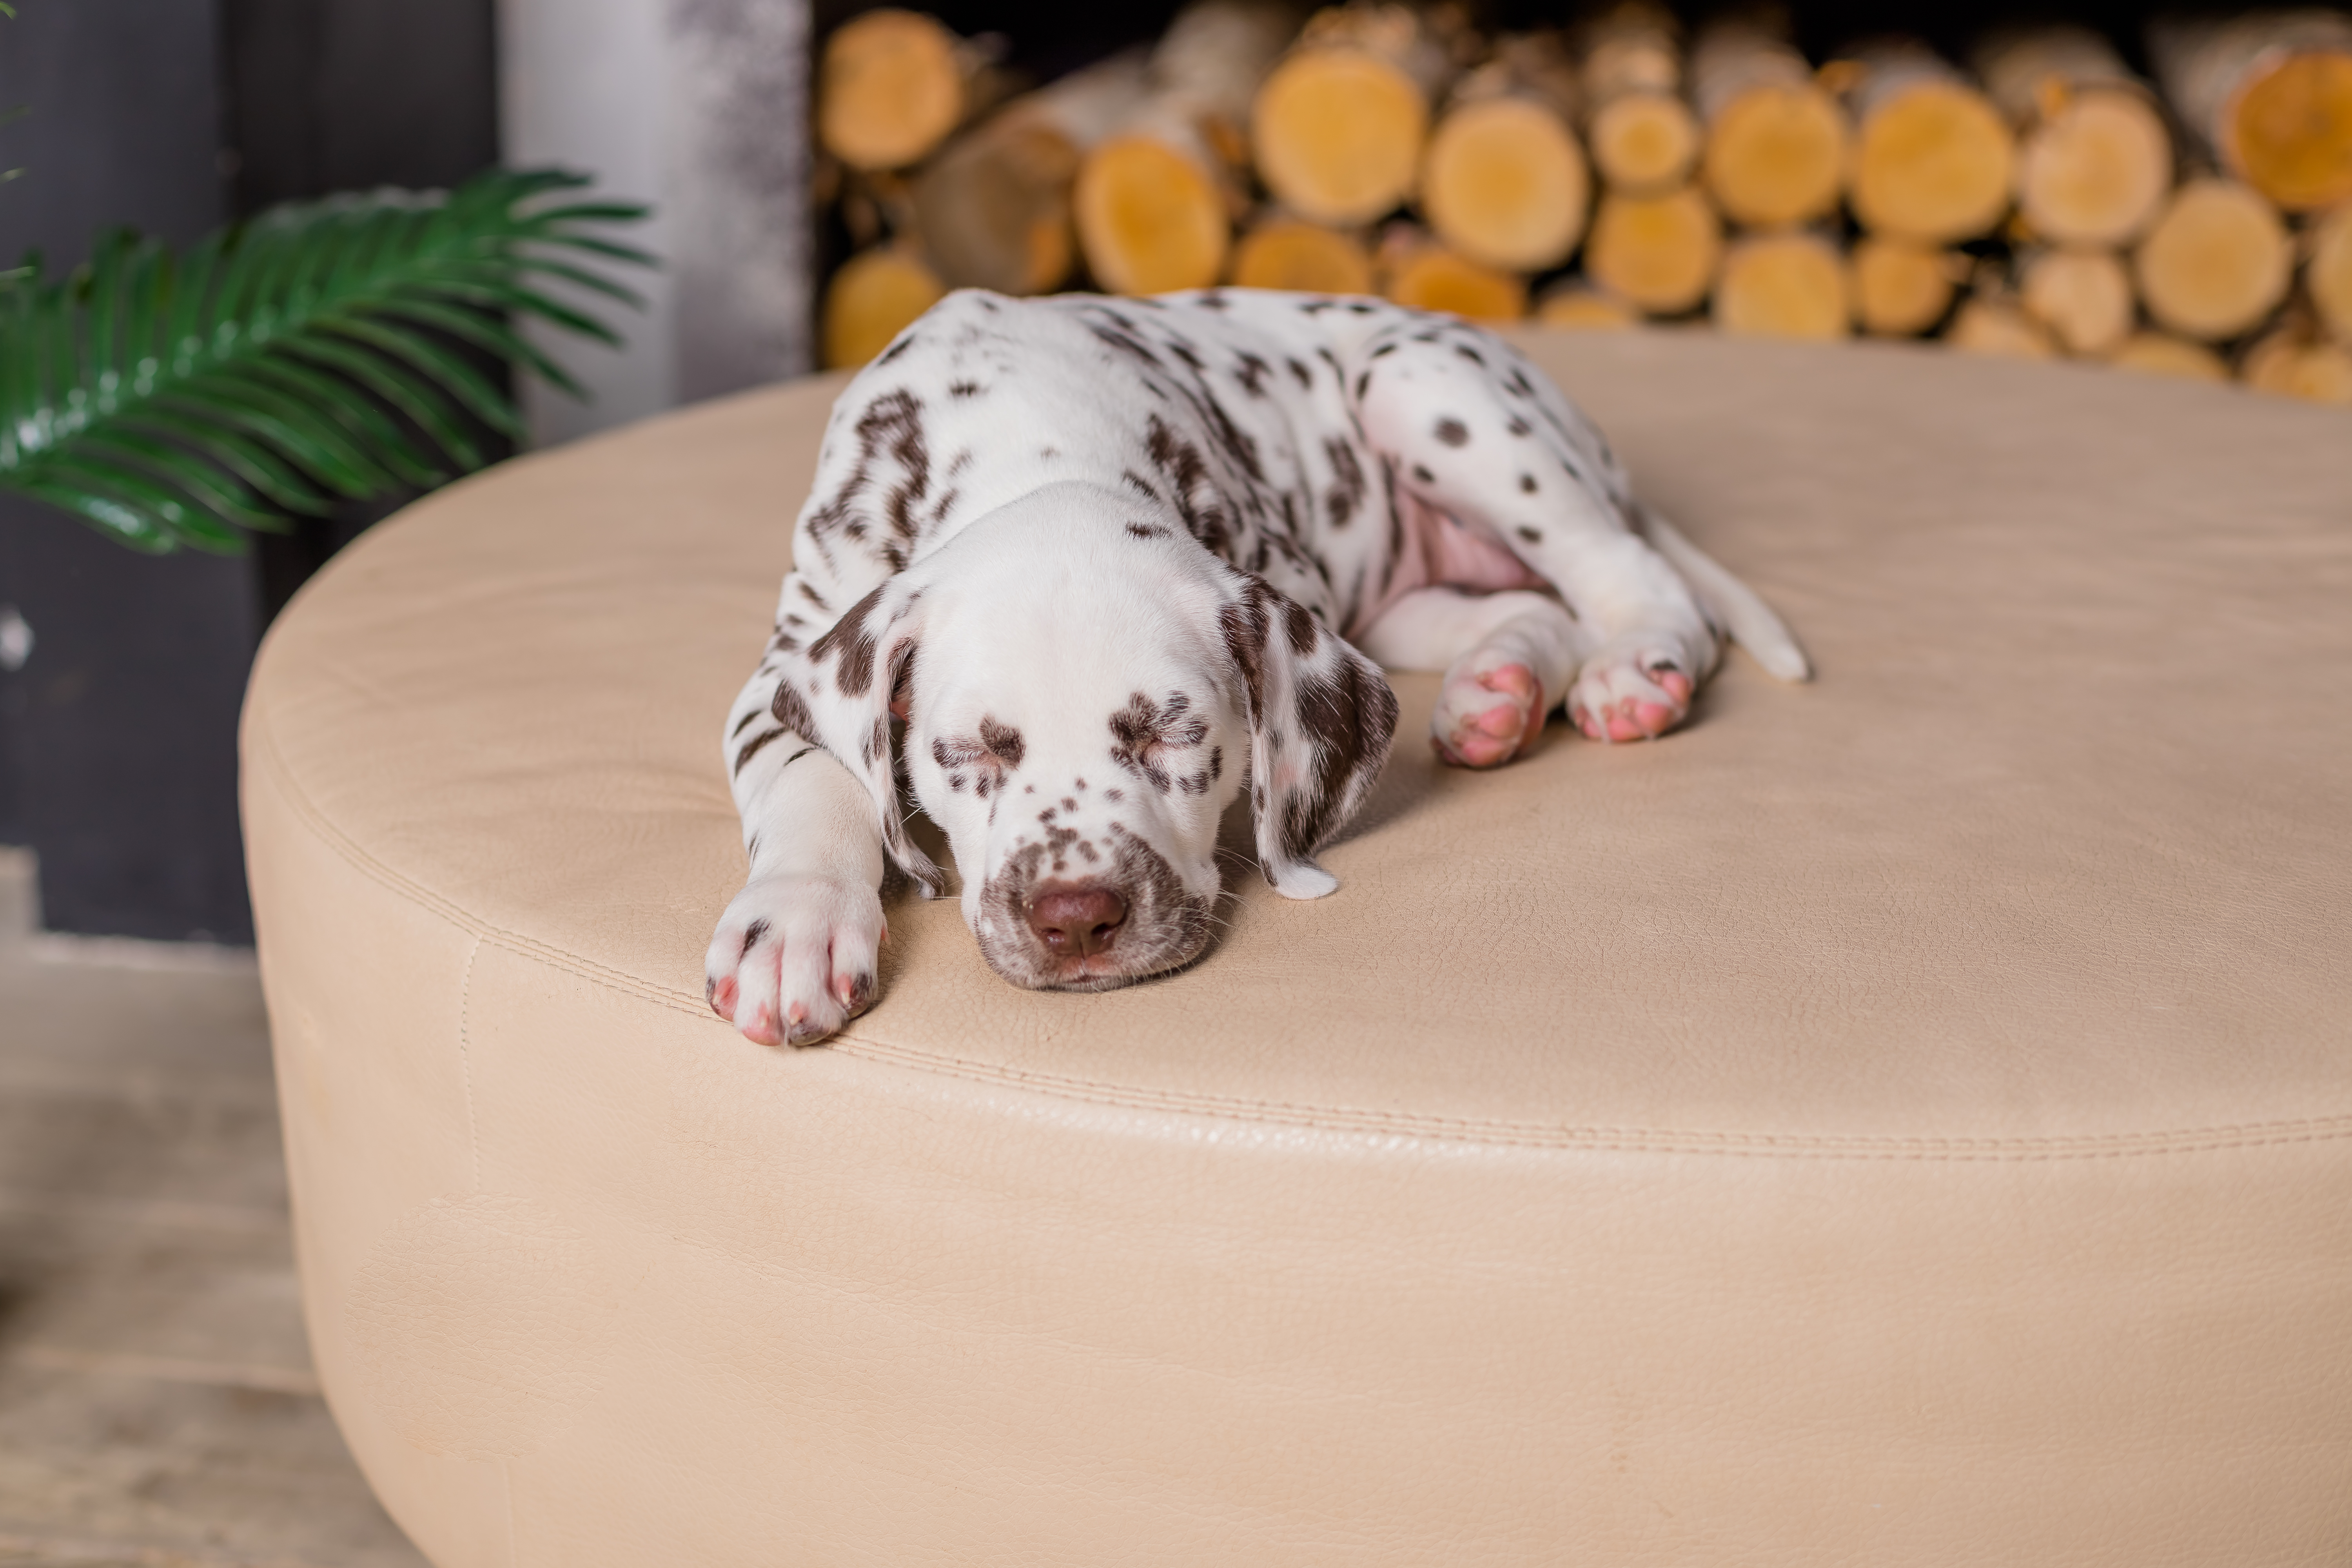 Sleeping Dalmatian puppy on a bed